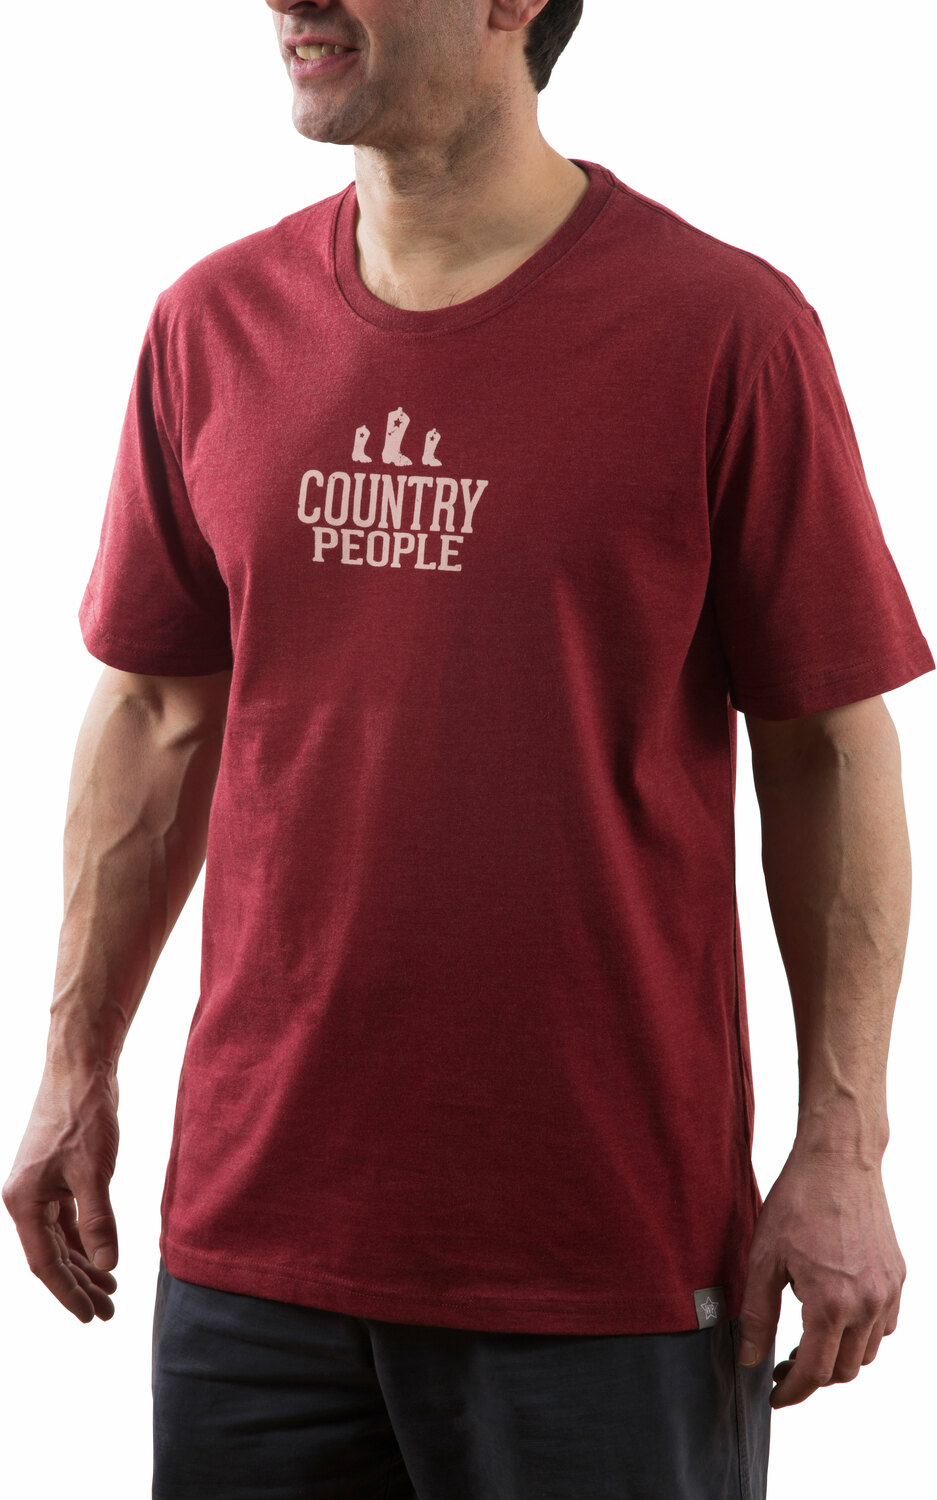 Country People by We People - Country People - Small Red Unisex T-Shirt